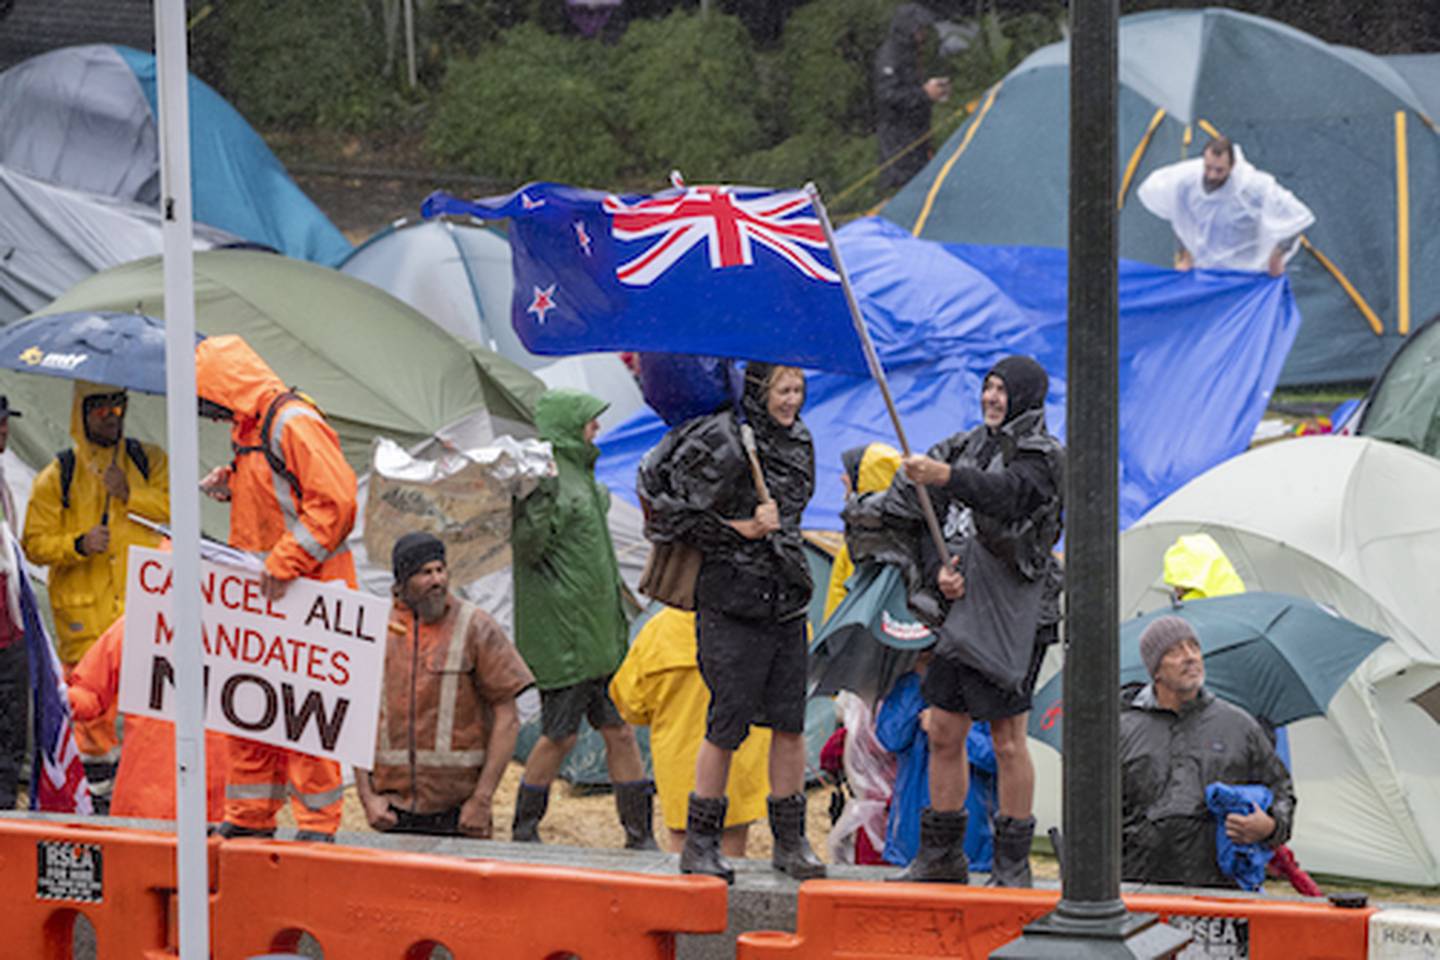 Protesters braving wet conditions during the anti-vax, anti-mandate and anti-Government protest and occupation at Parliament in Wellington. 13 February, 2022. Photo / Mark Mitchell